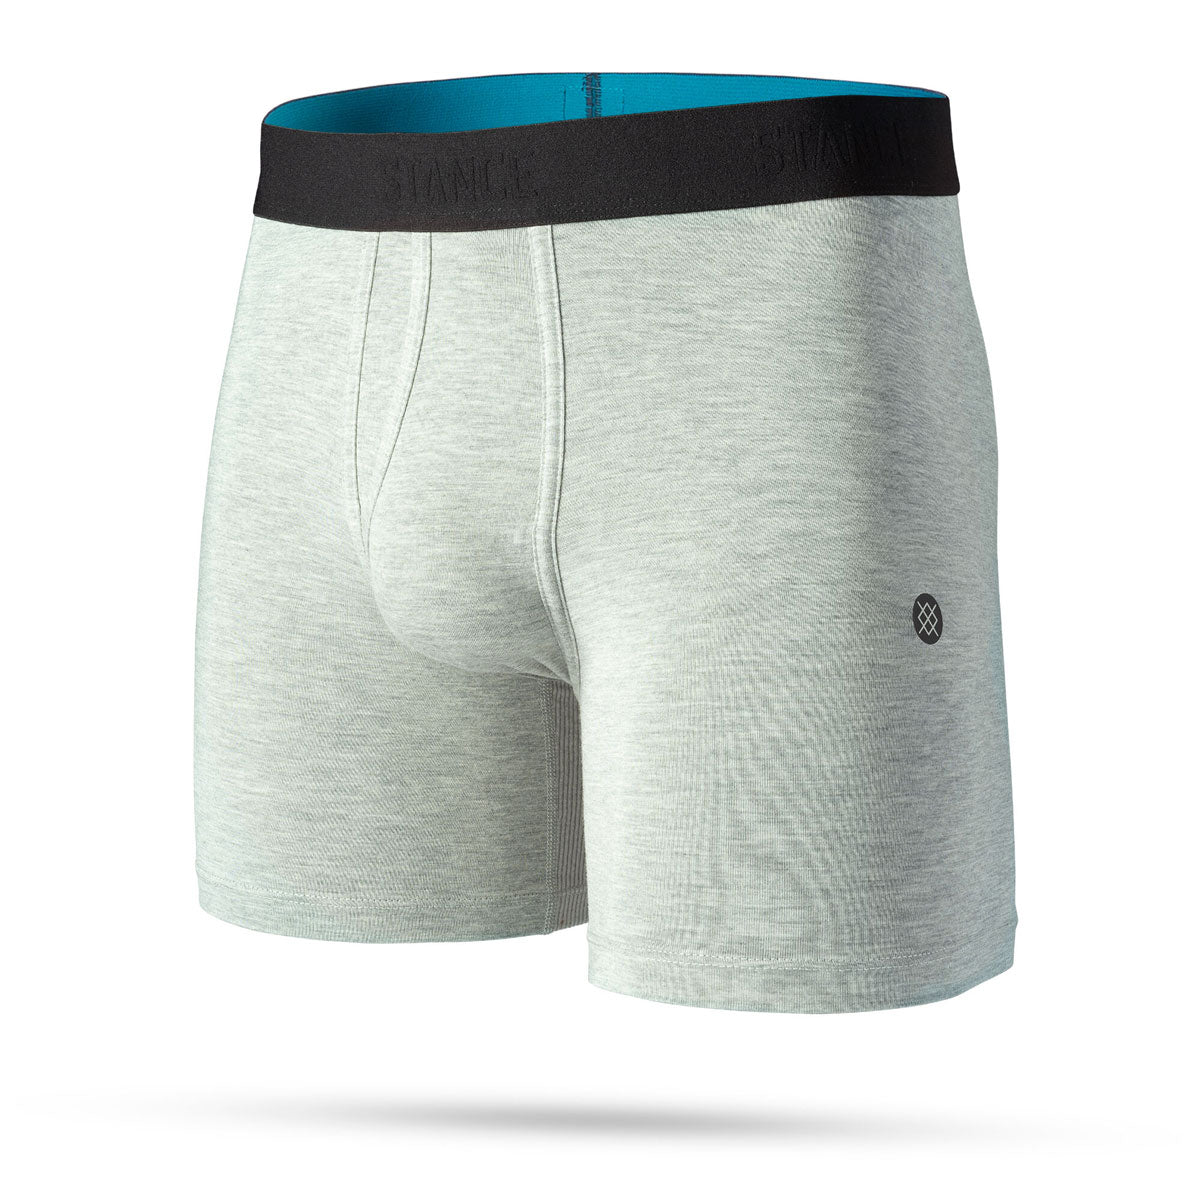 Stance Staple St 6in Boxer Brief - Heather Grey image 1